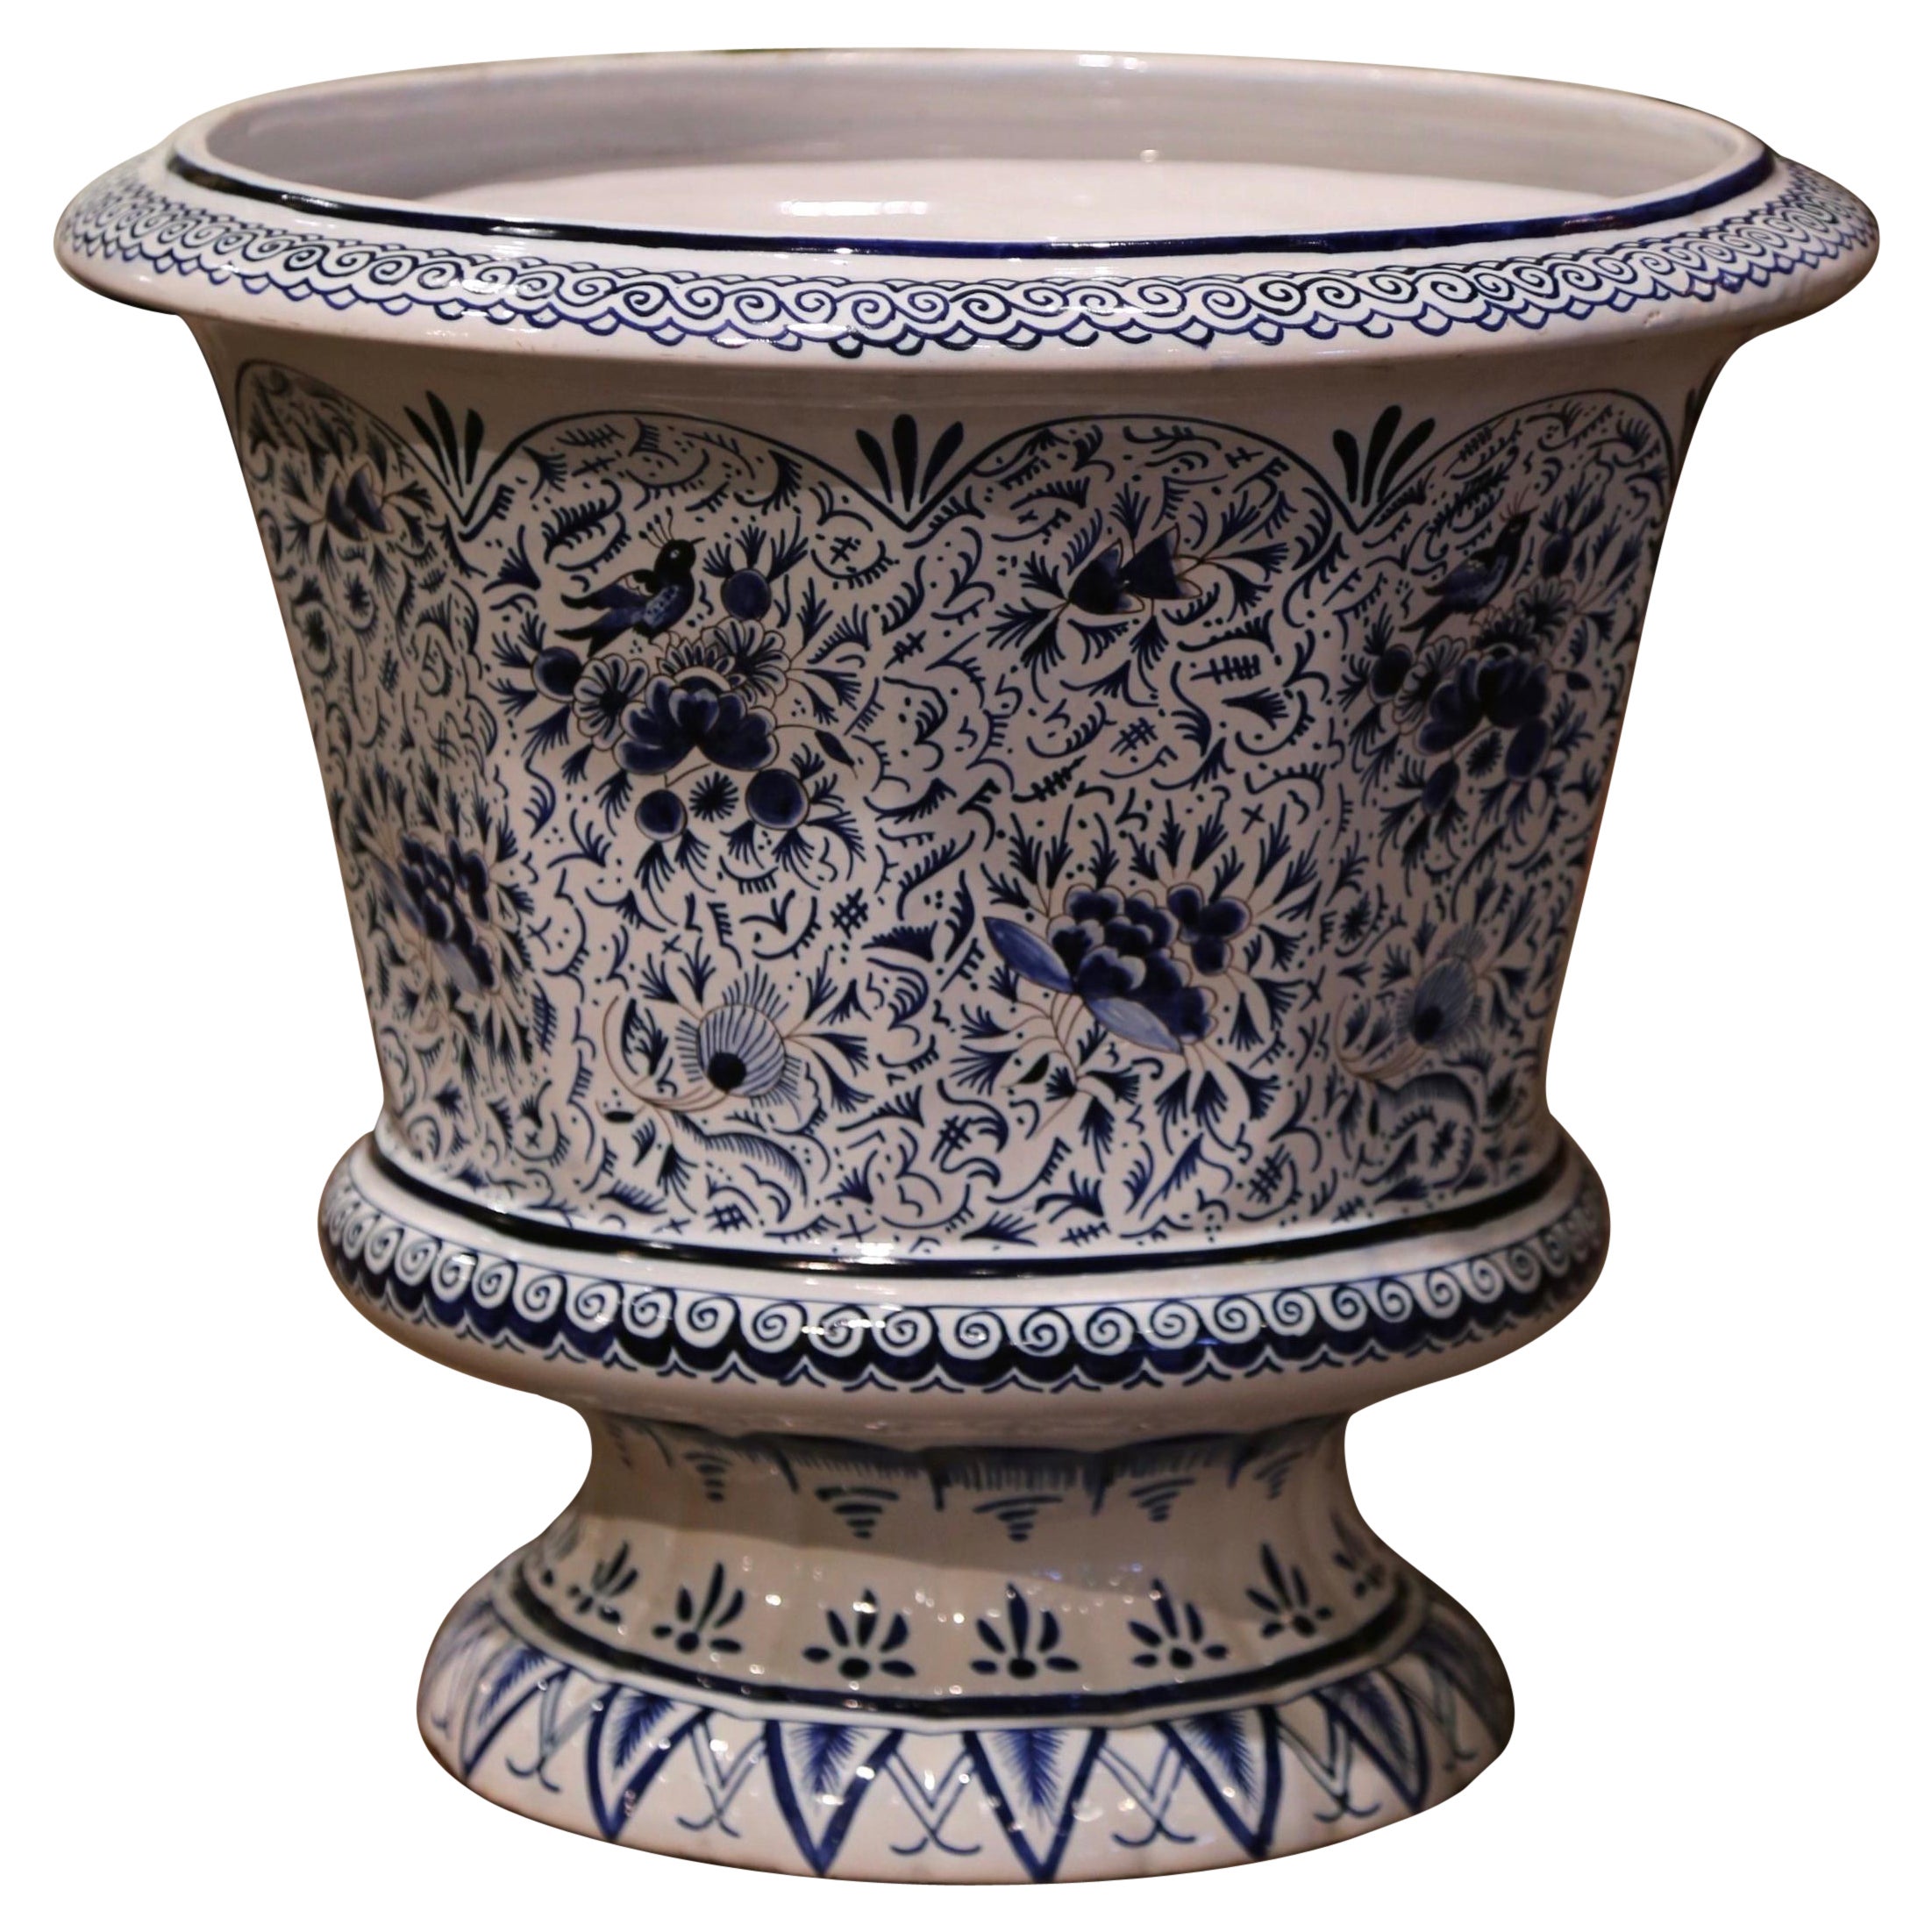 19th Century French Blue and White Faience Cache Pot with Floral and Bird Motifs